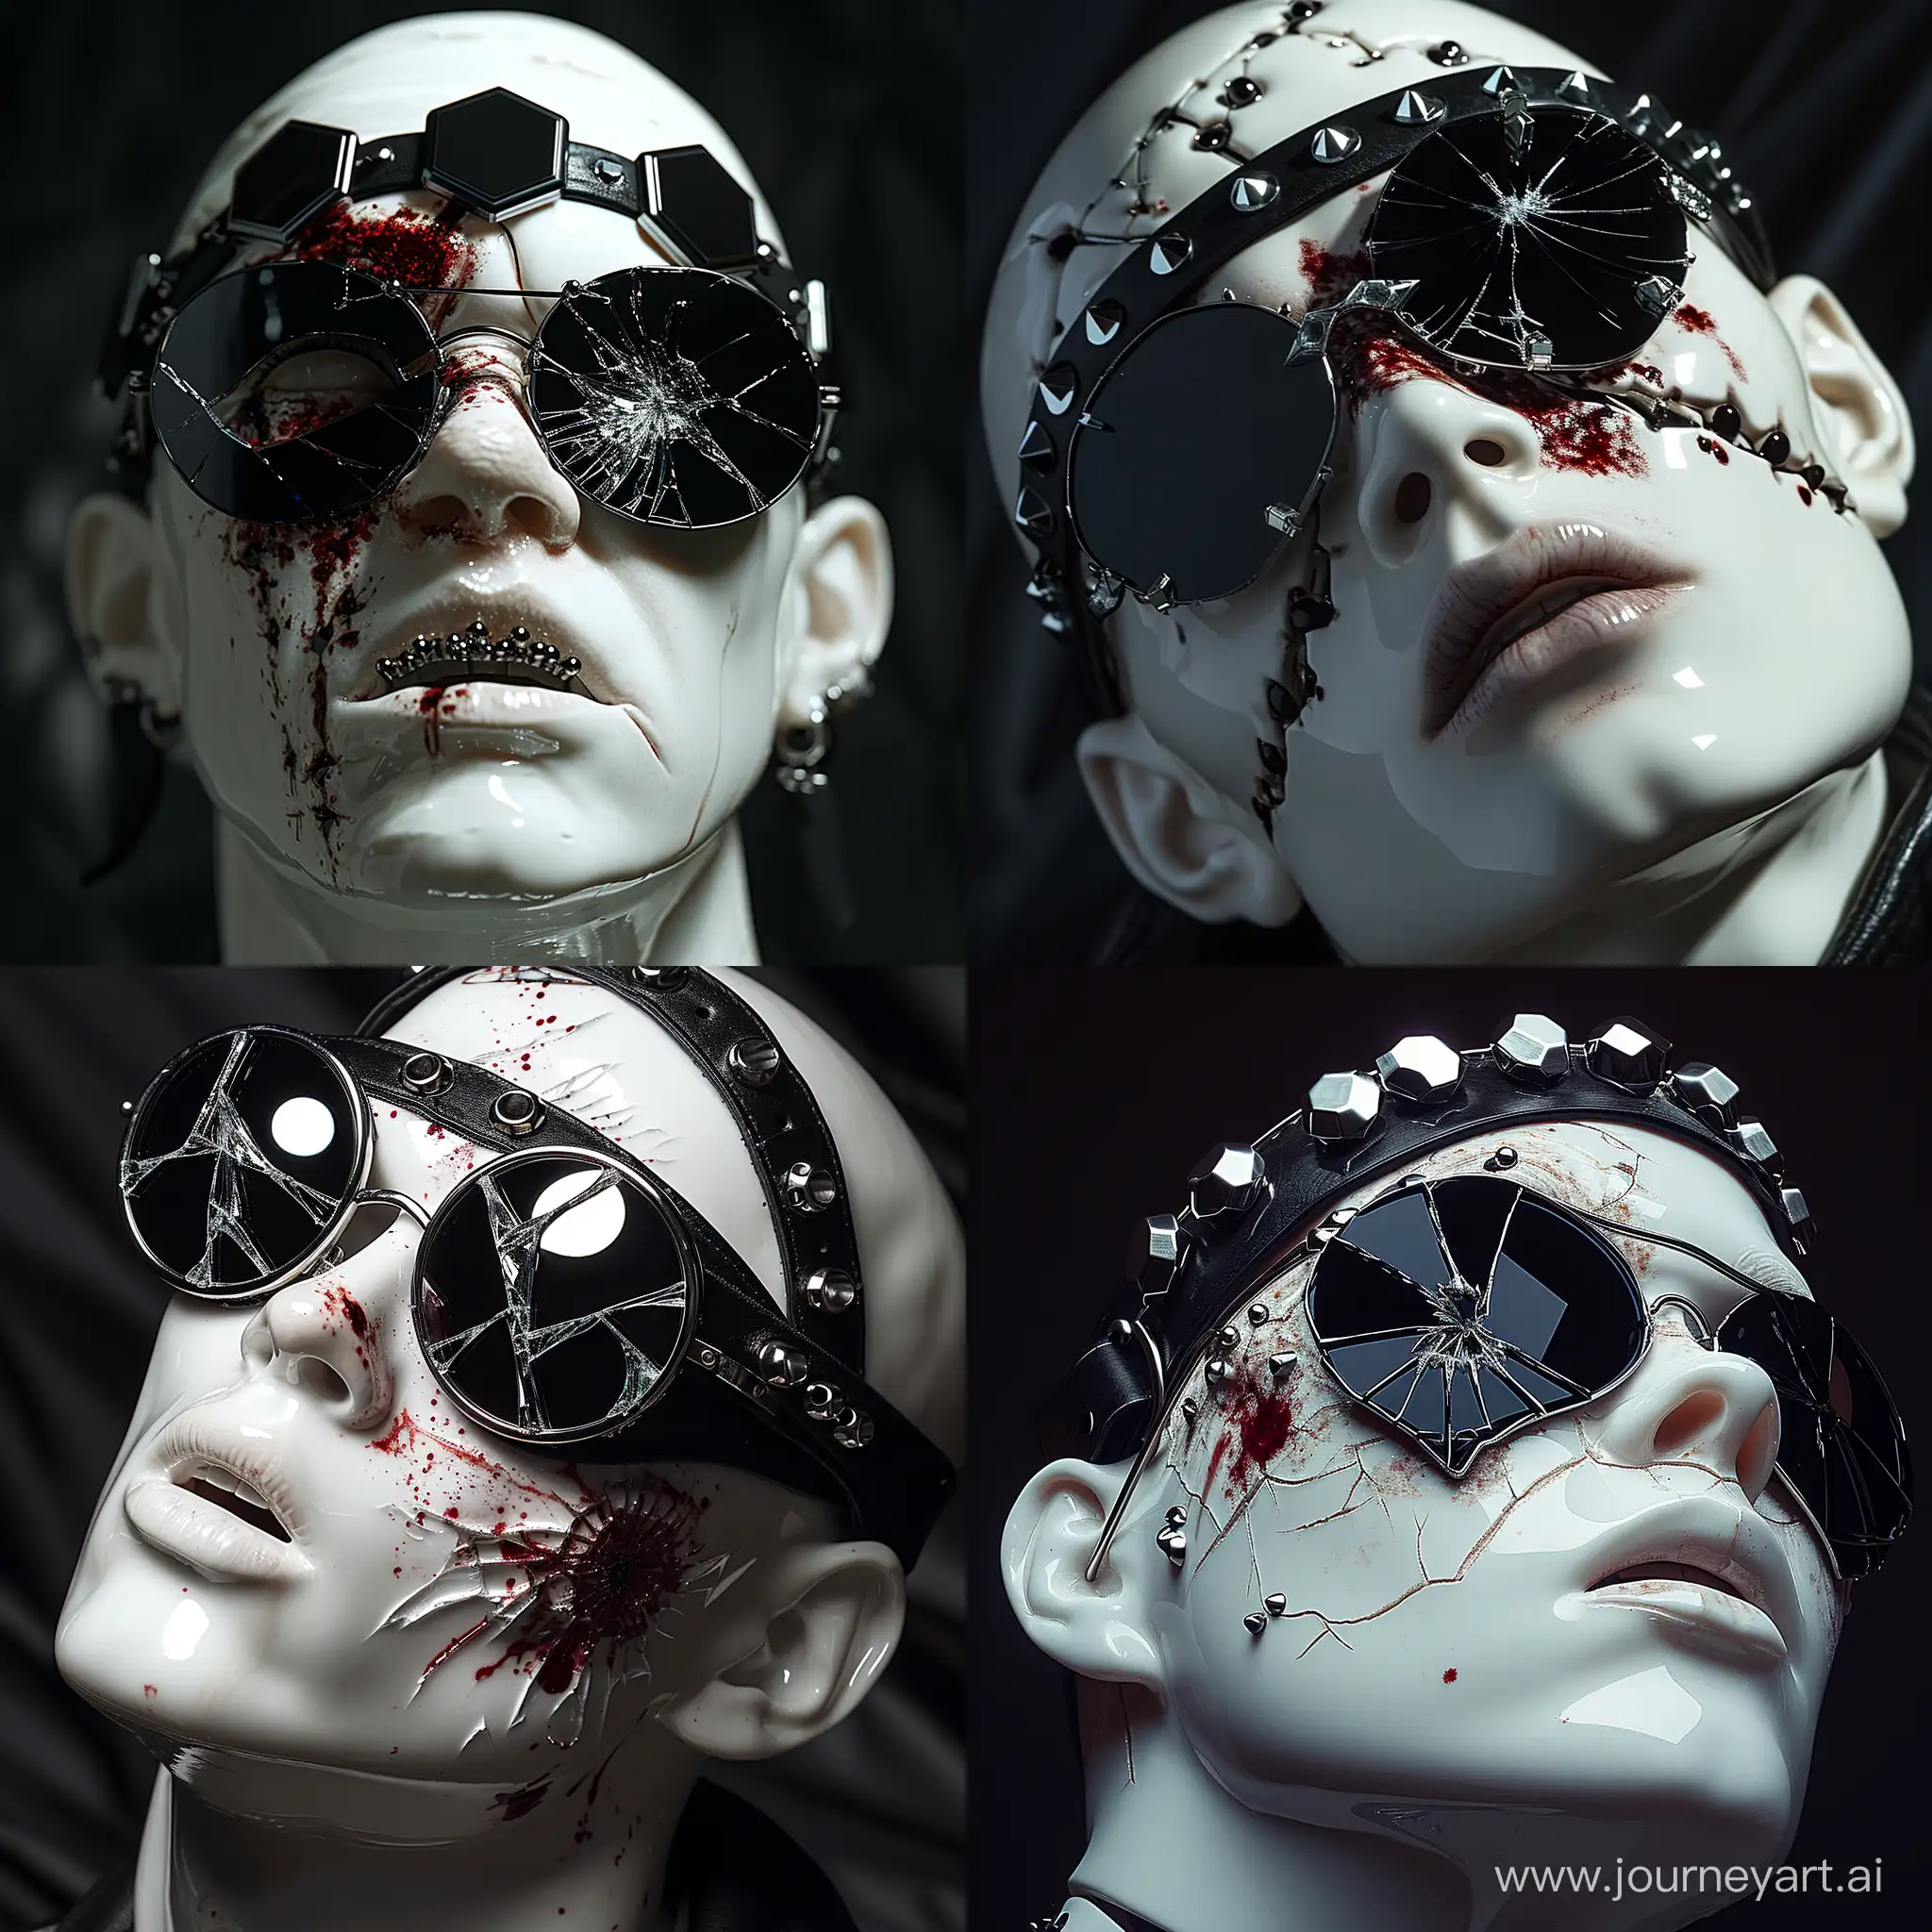 Dramatic-Closeup-of-Broken-Glasses-and-Bloodstain-on-Porcelain-Mans-Face